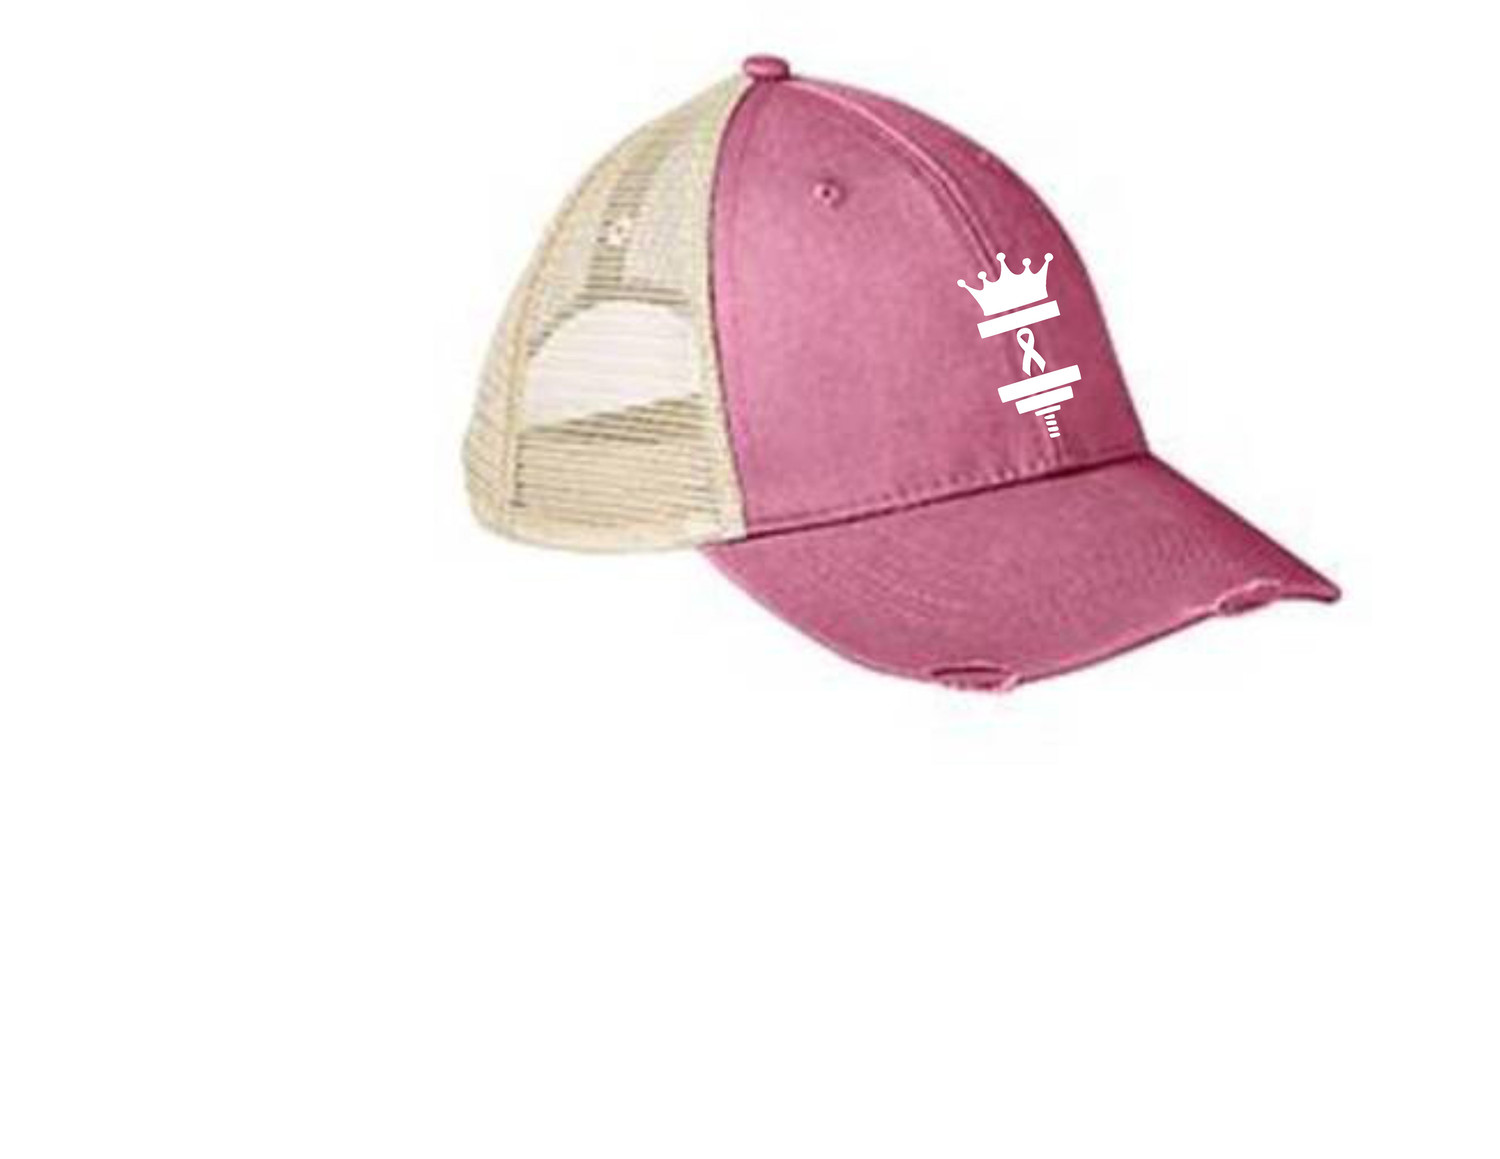 Mpower Your Beast Breast Cancer Awareness Hats Mpower Your Beast